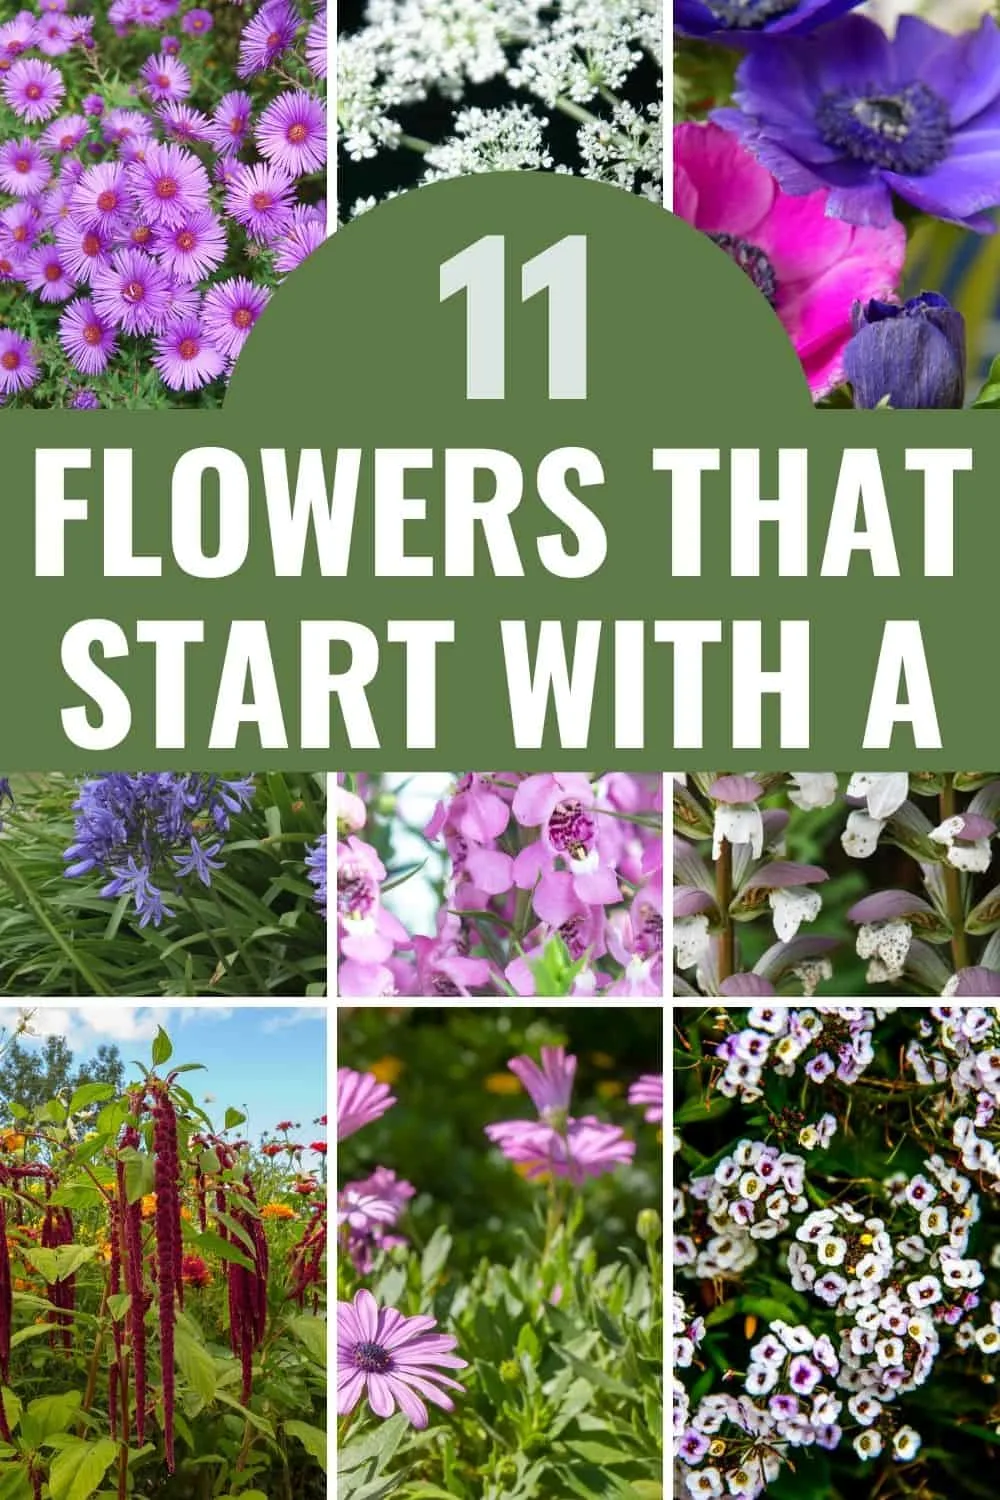 11 flowers that start with A